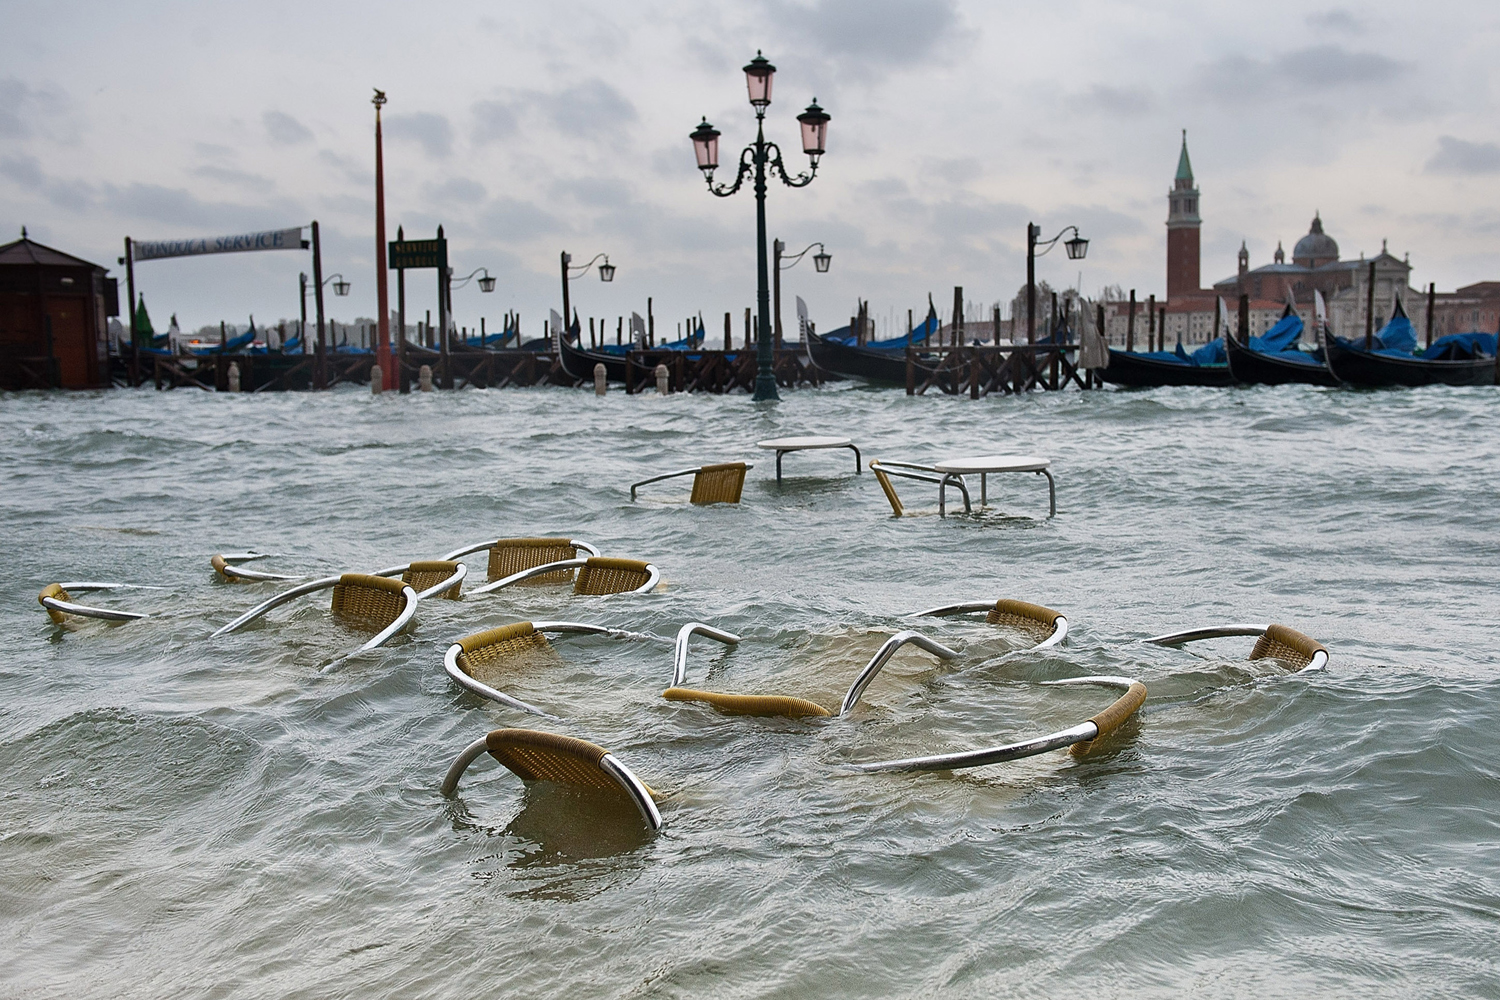 Image: Nov. 11, 2012. A view of St. Mark's Basin during covered by exceptionally high water in Venice.